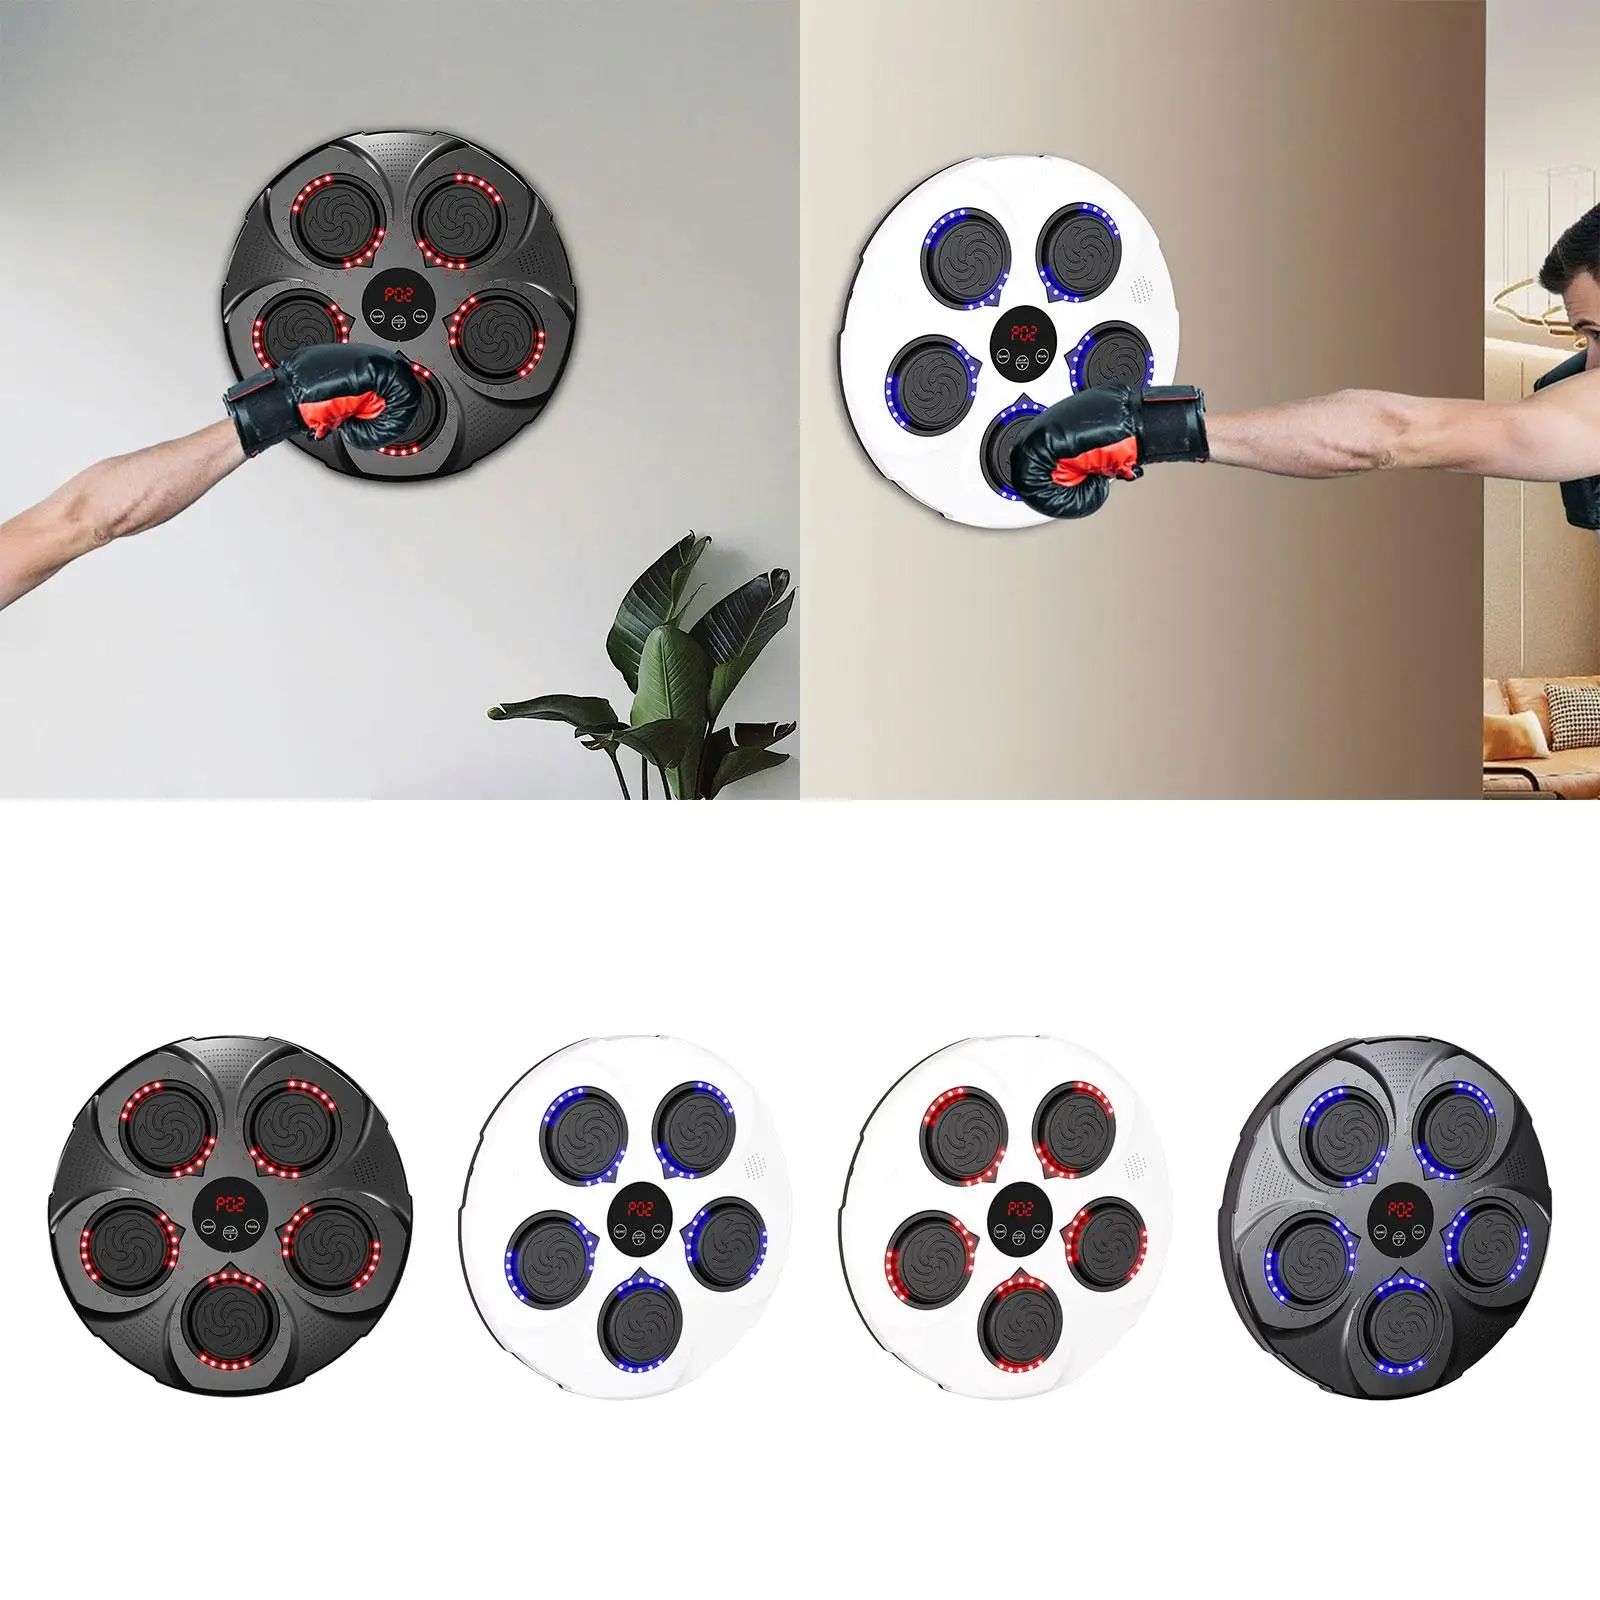 Music Boxing Machine Workout Exercise Adults Kids Boxing Equipment Rhythm Musical Target Improves Speed Response Coordination